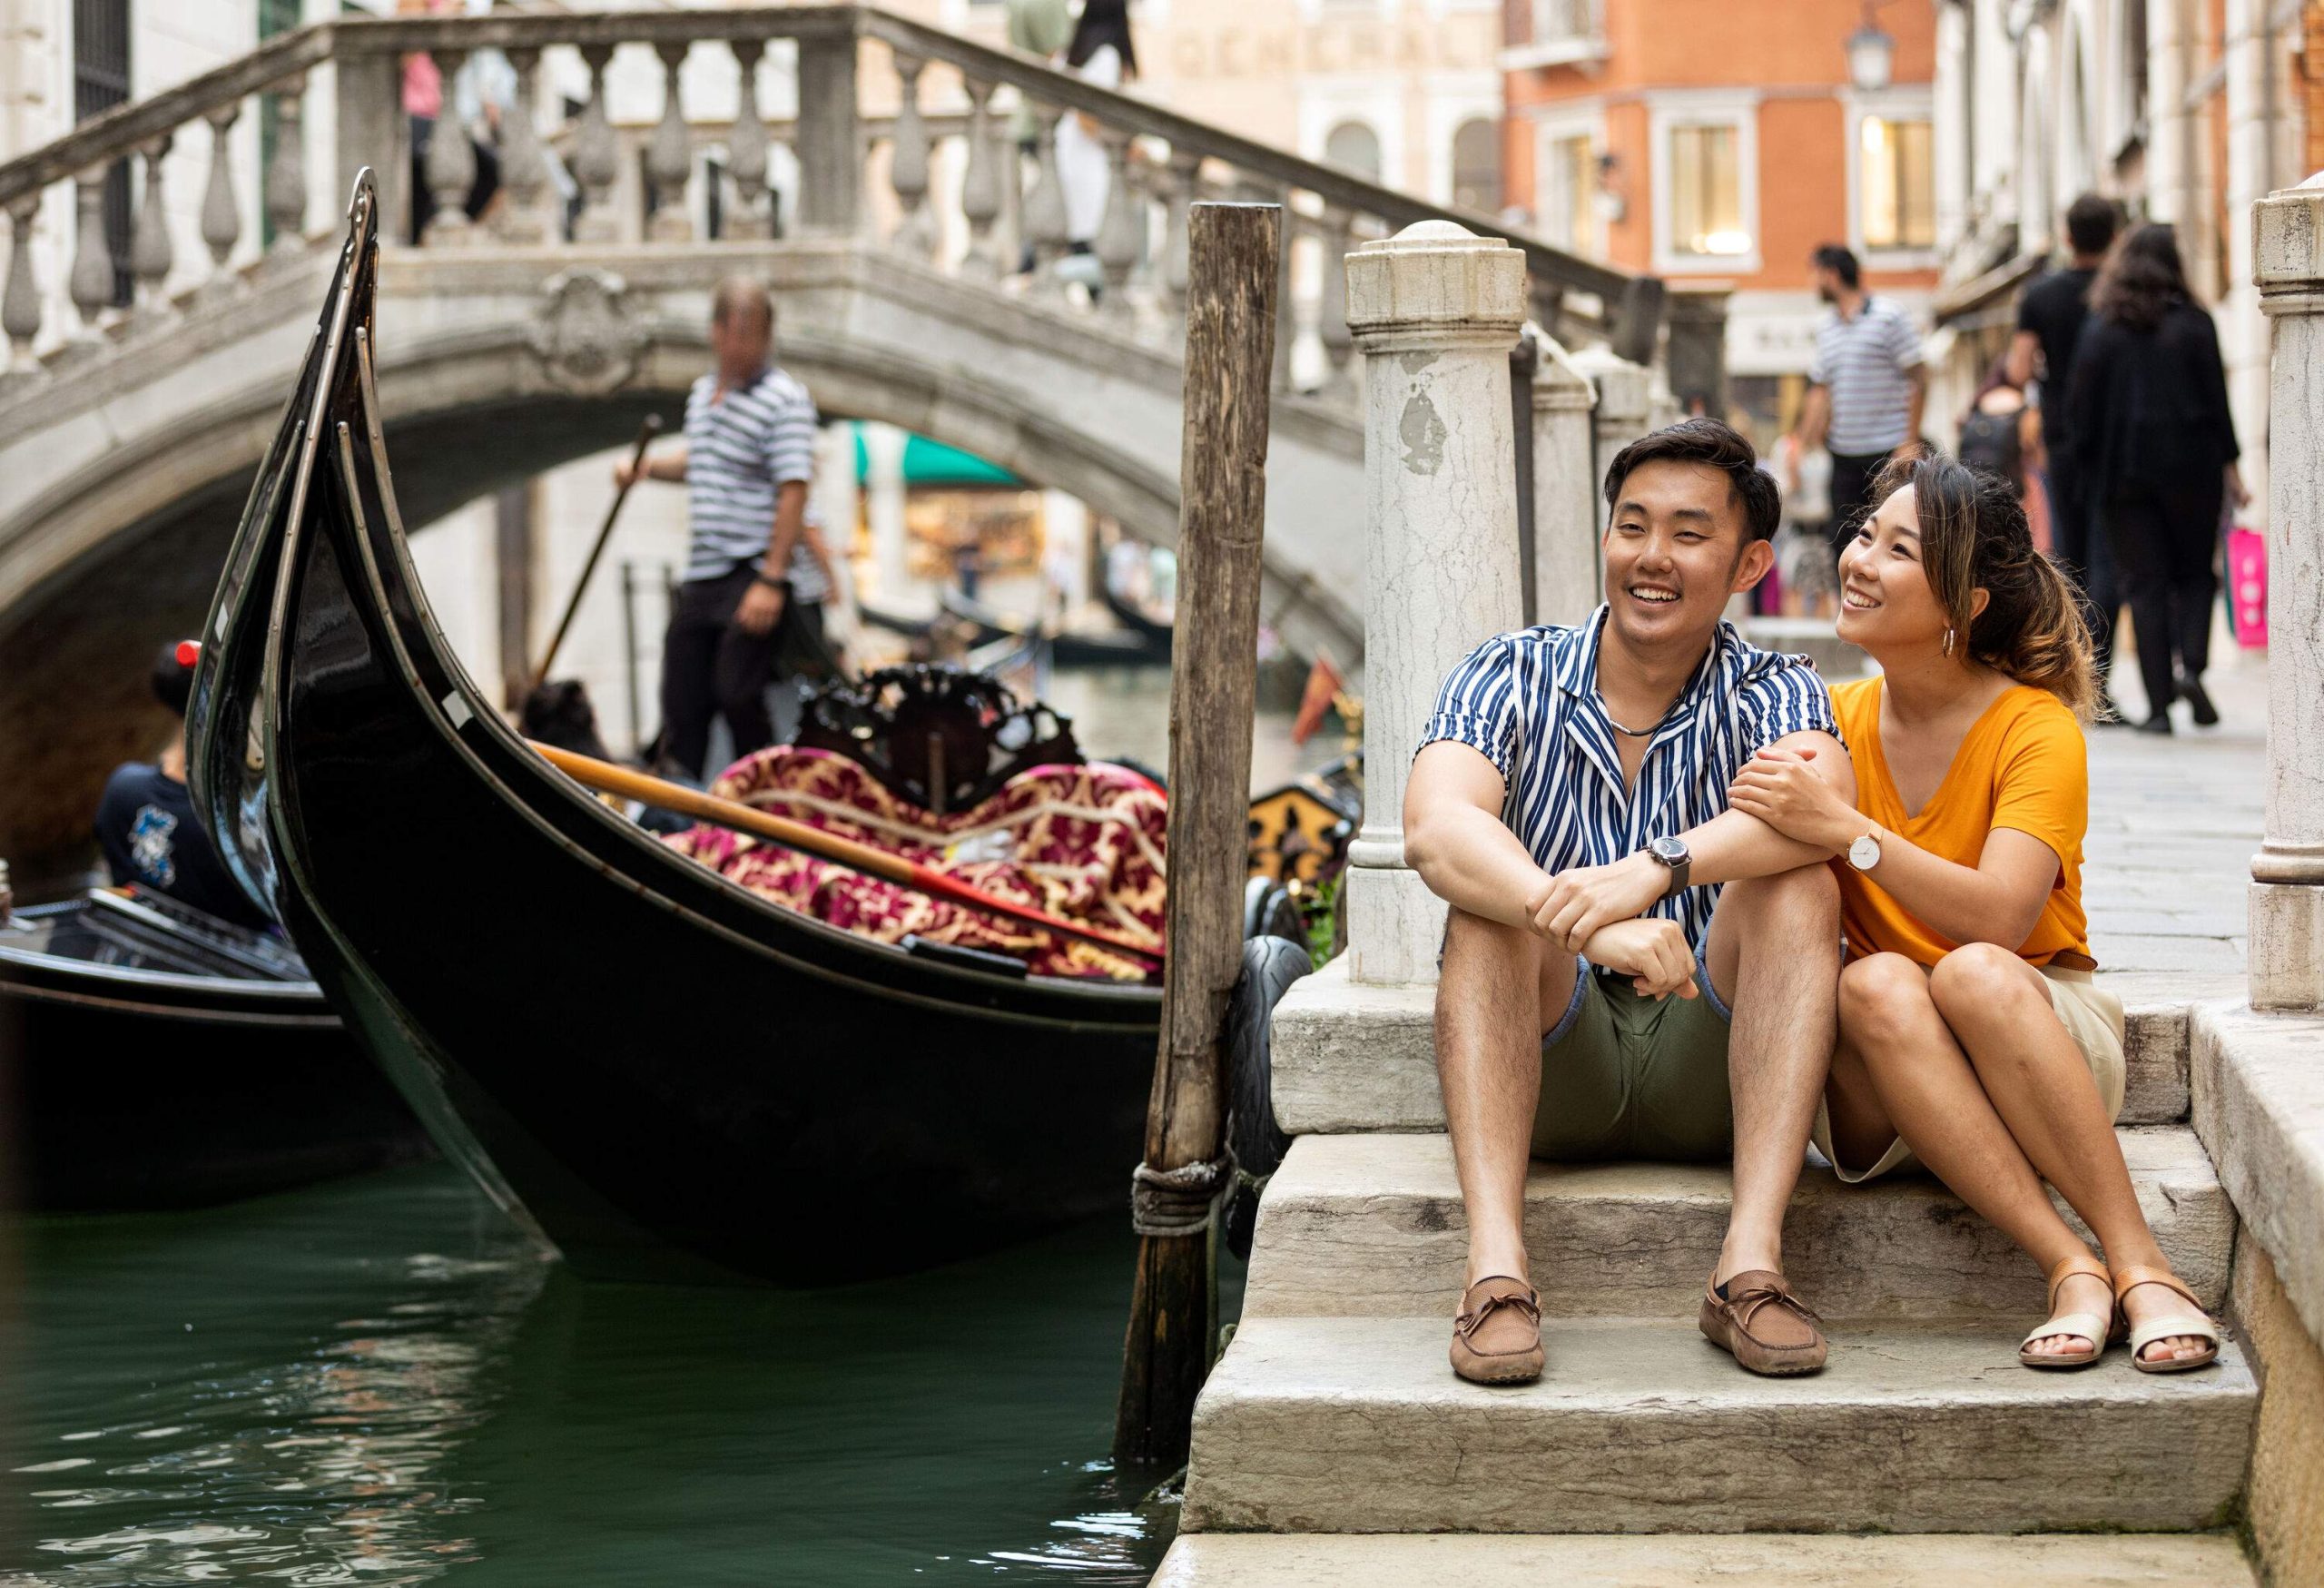 A happy couple sits on the stairs of a water canal with sailing gondolas under an arch bridge.